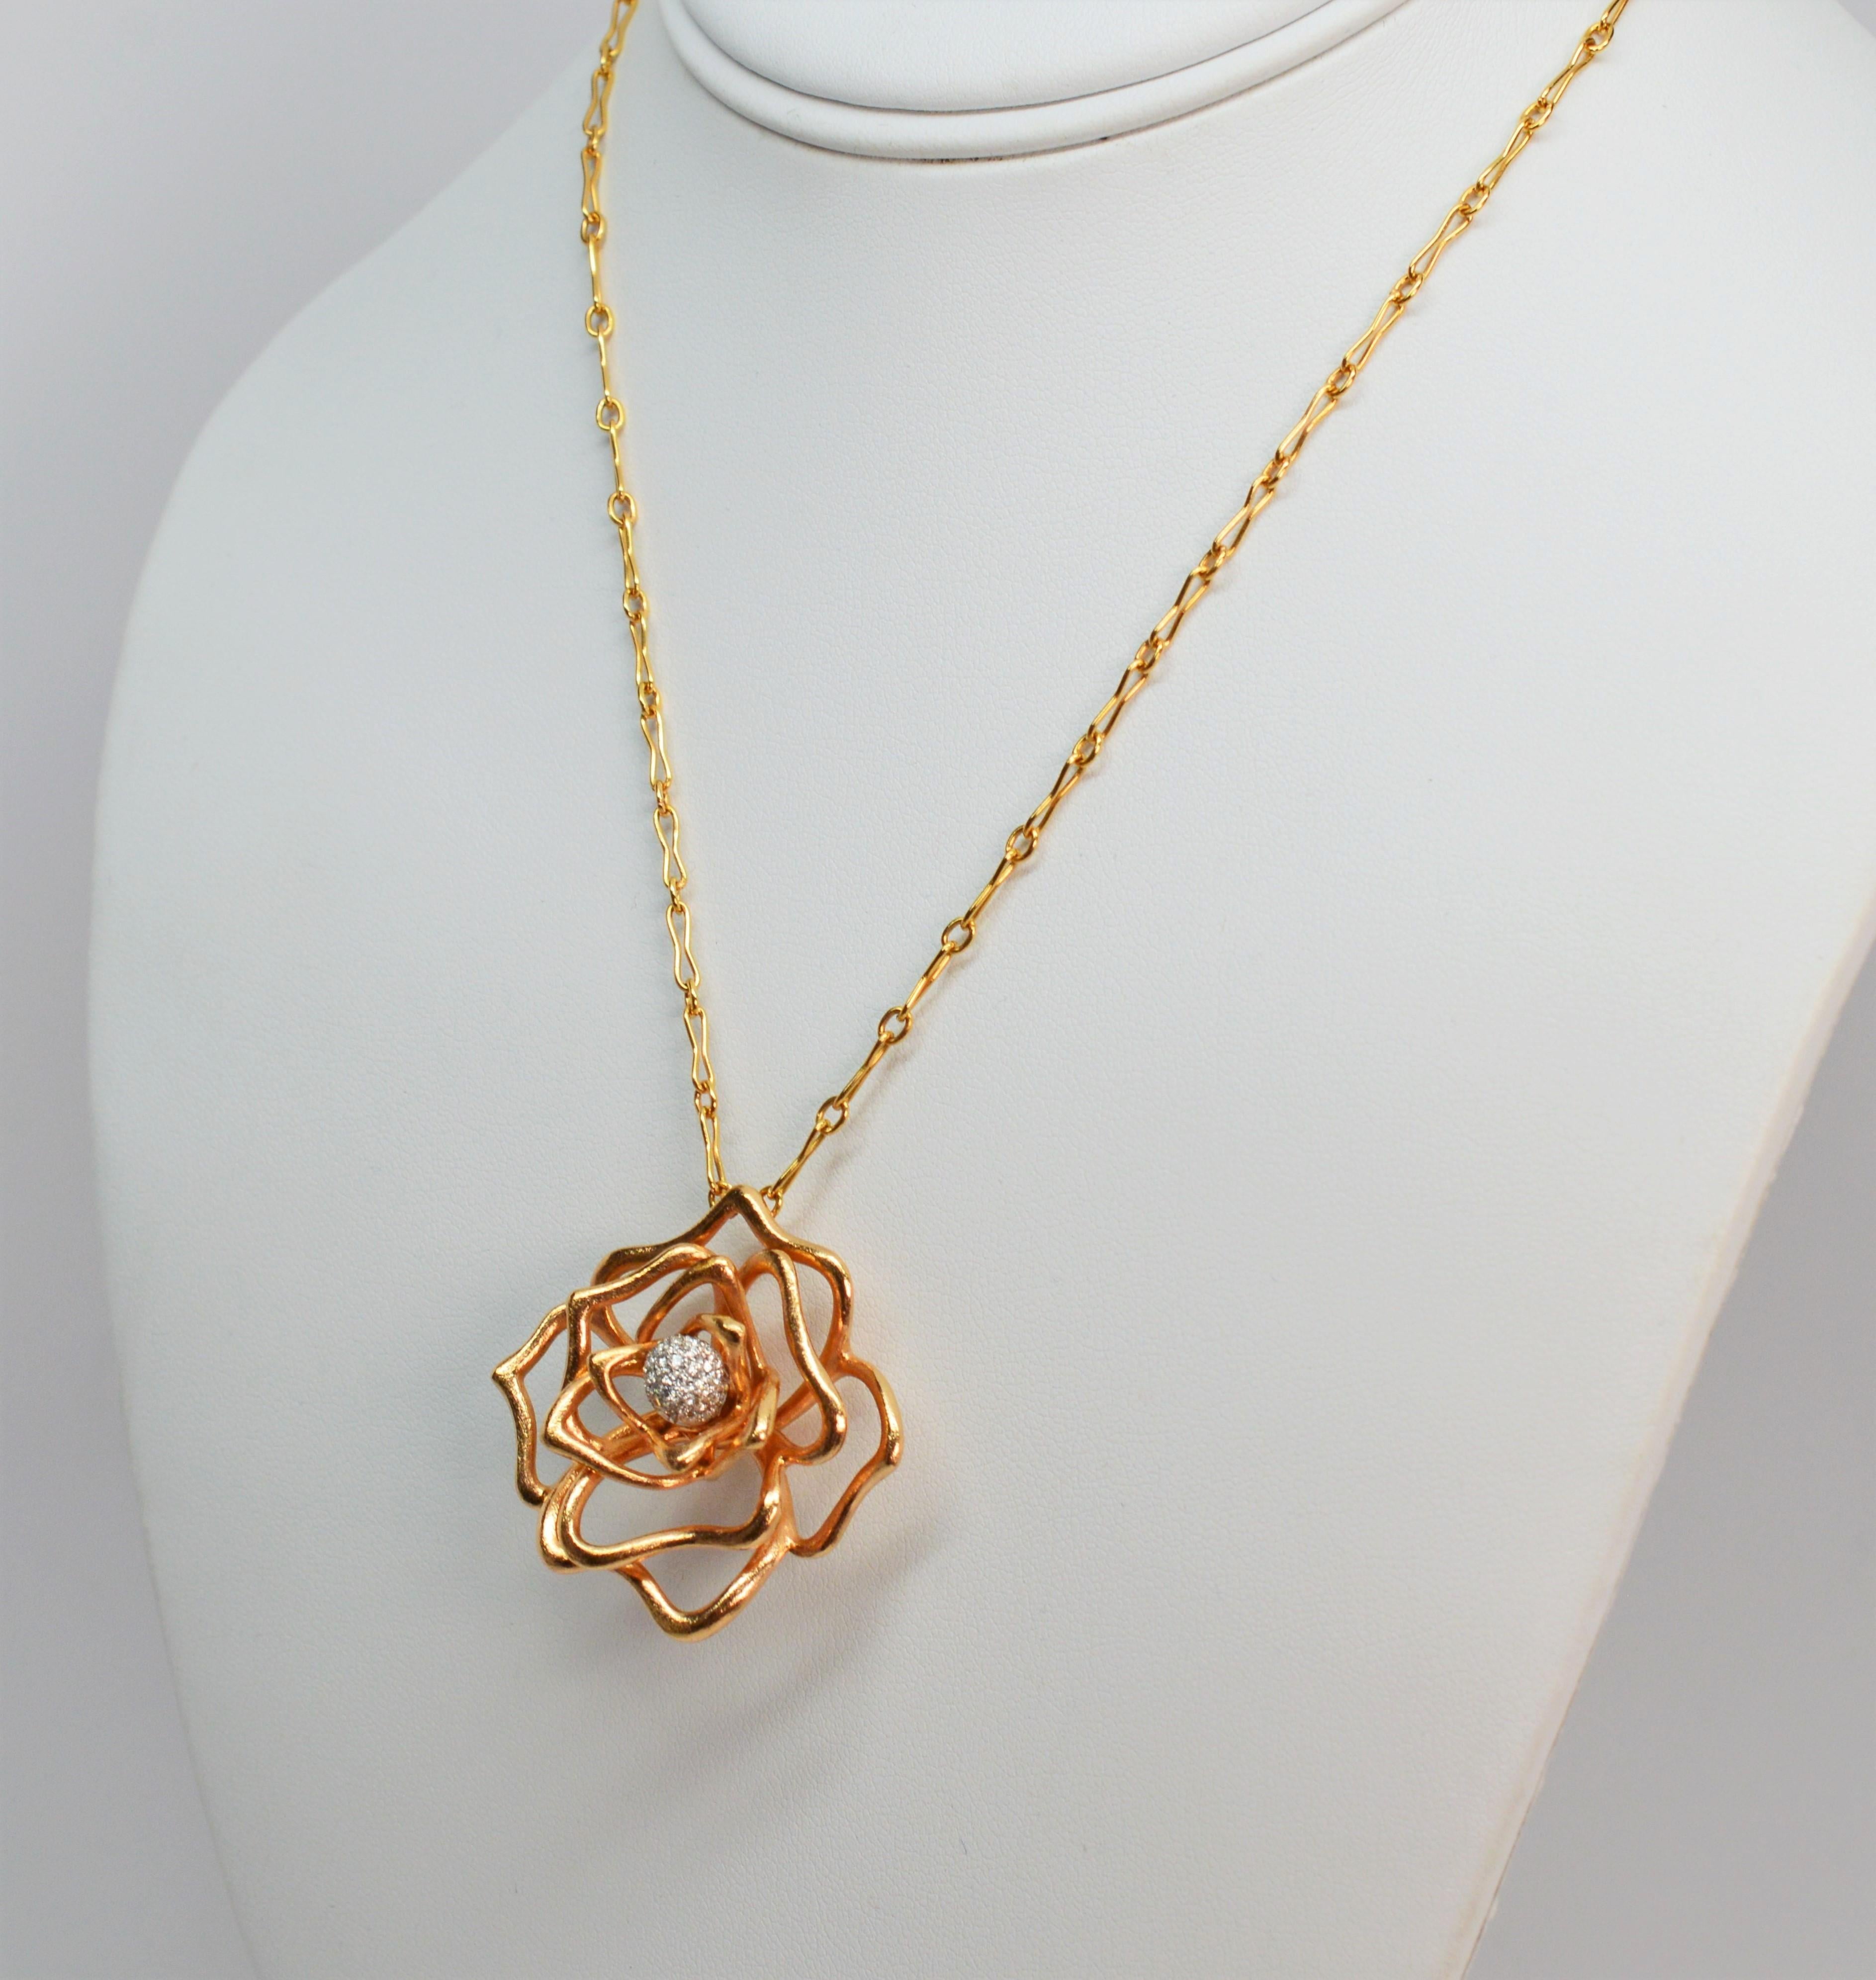 This artfully designed necklace by Roberto Coin portrays a dimensional free style rose with openwork petals in polish eighteen karat 18K rose gold. The floral center is a light catching cluster of pave set diamonds G/VS1 at just under one carat. The